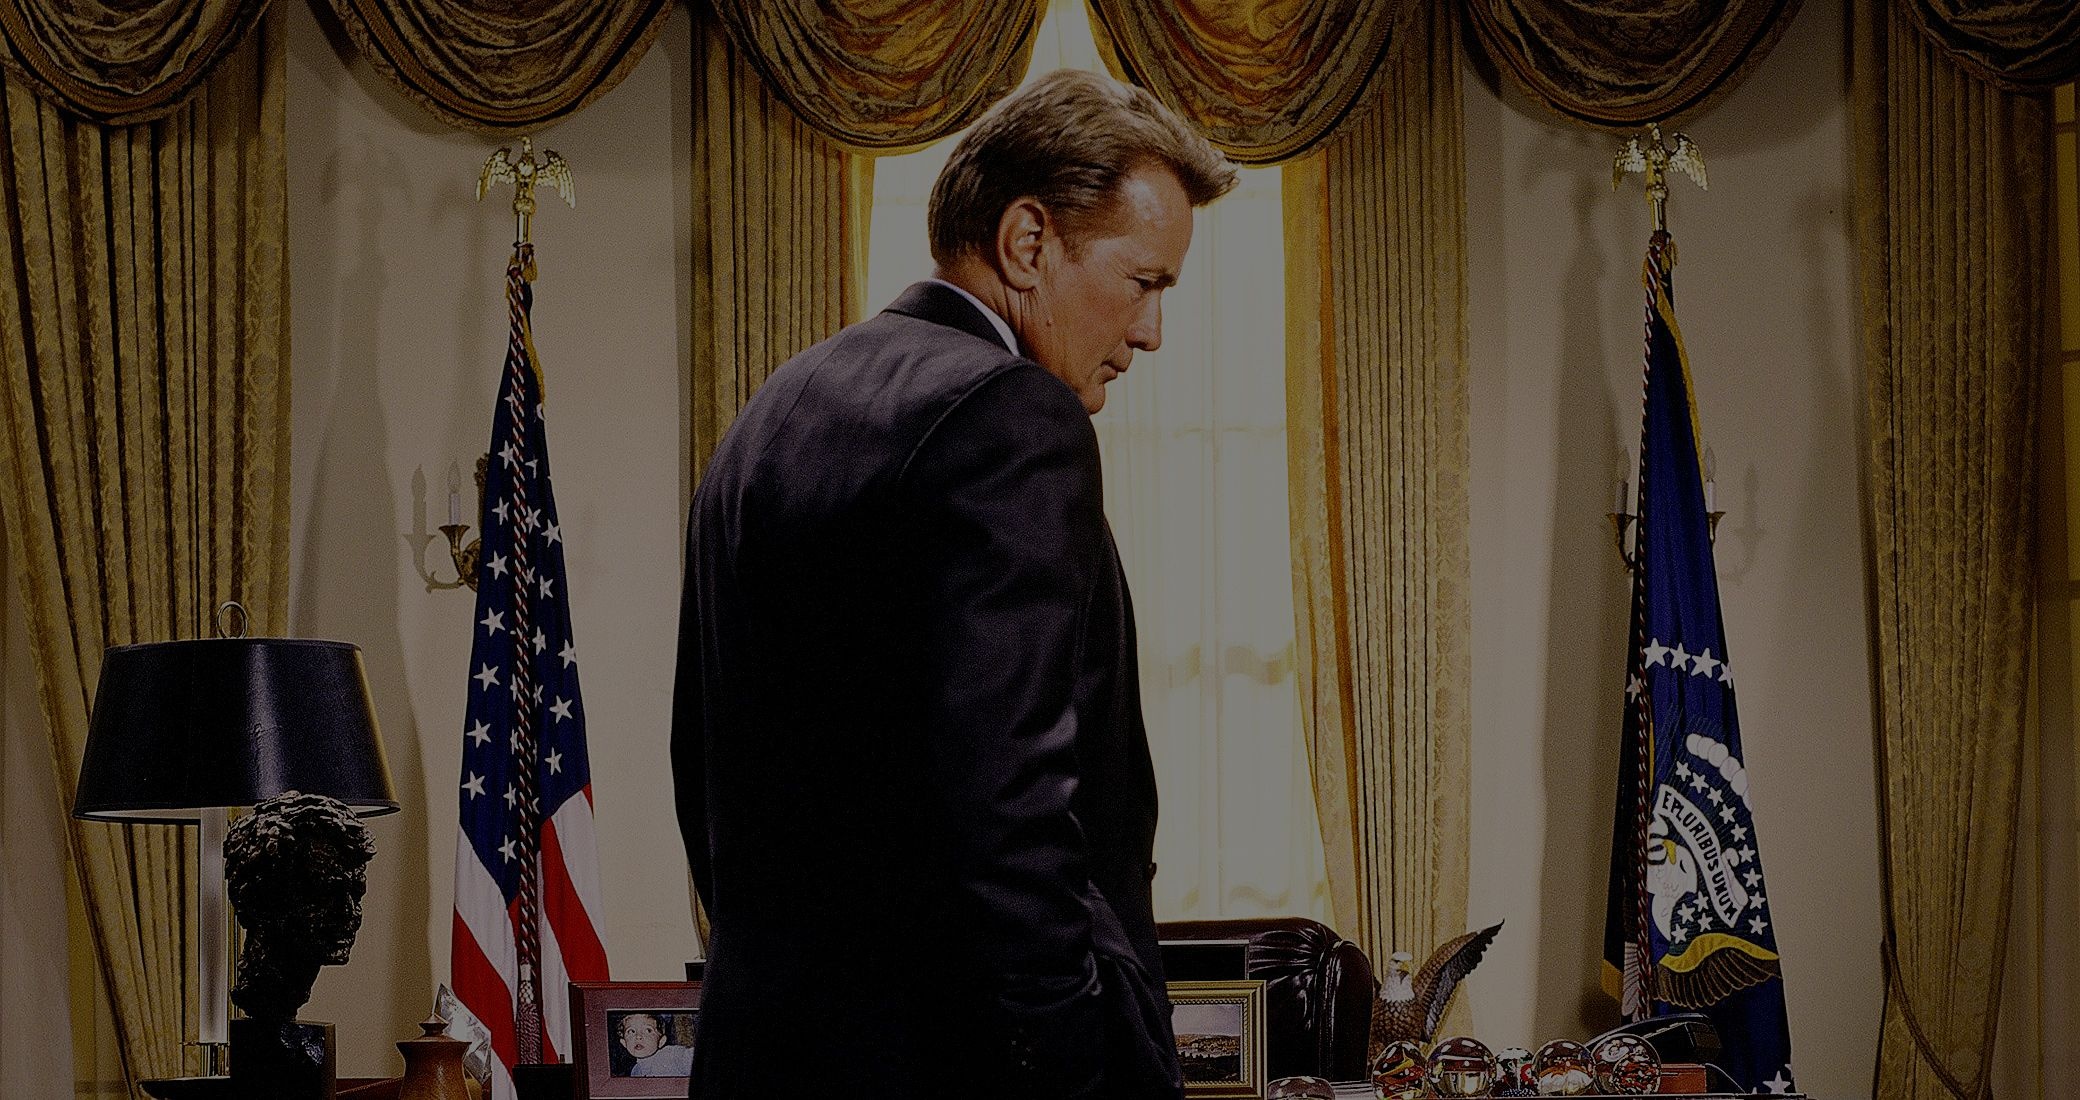 The West Wing (TV Series): Martin Sheen as Jed Bartlet, The fictional President of the United States. 2080x1100 HD Wallpaper.